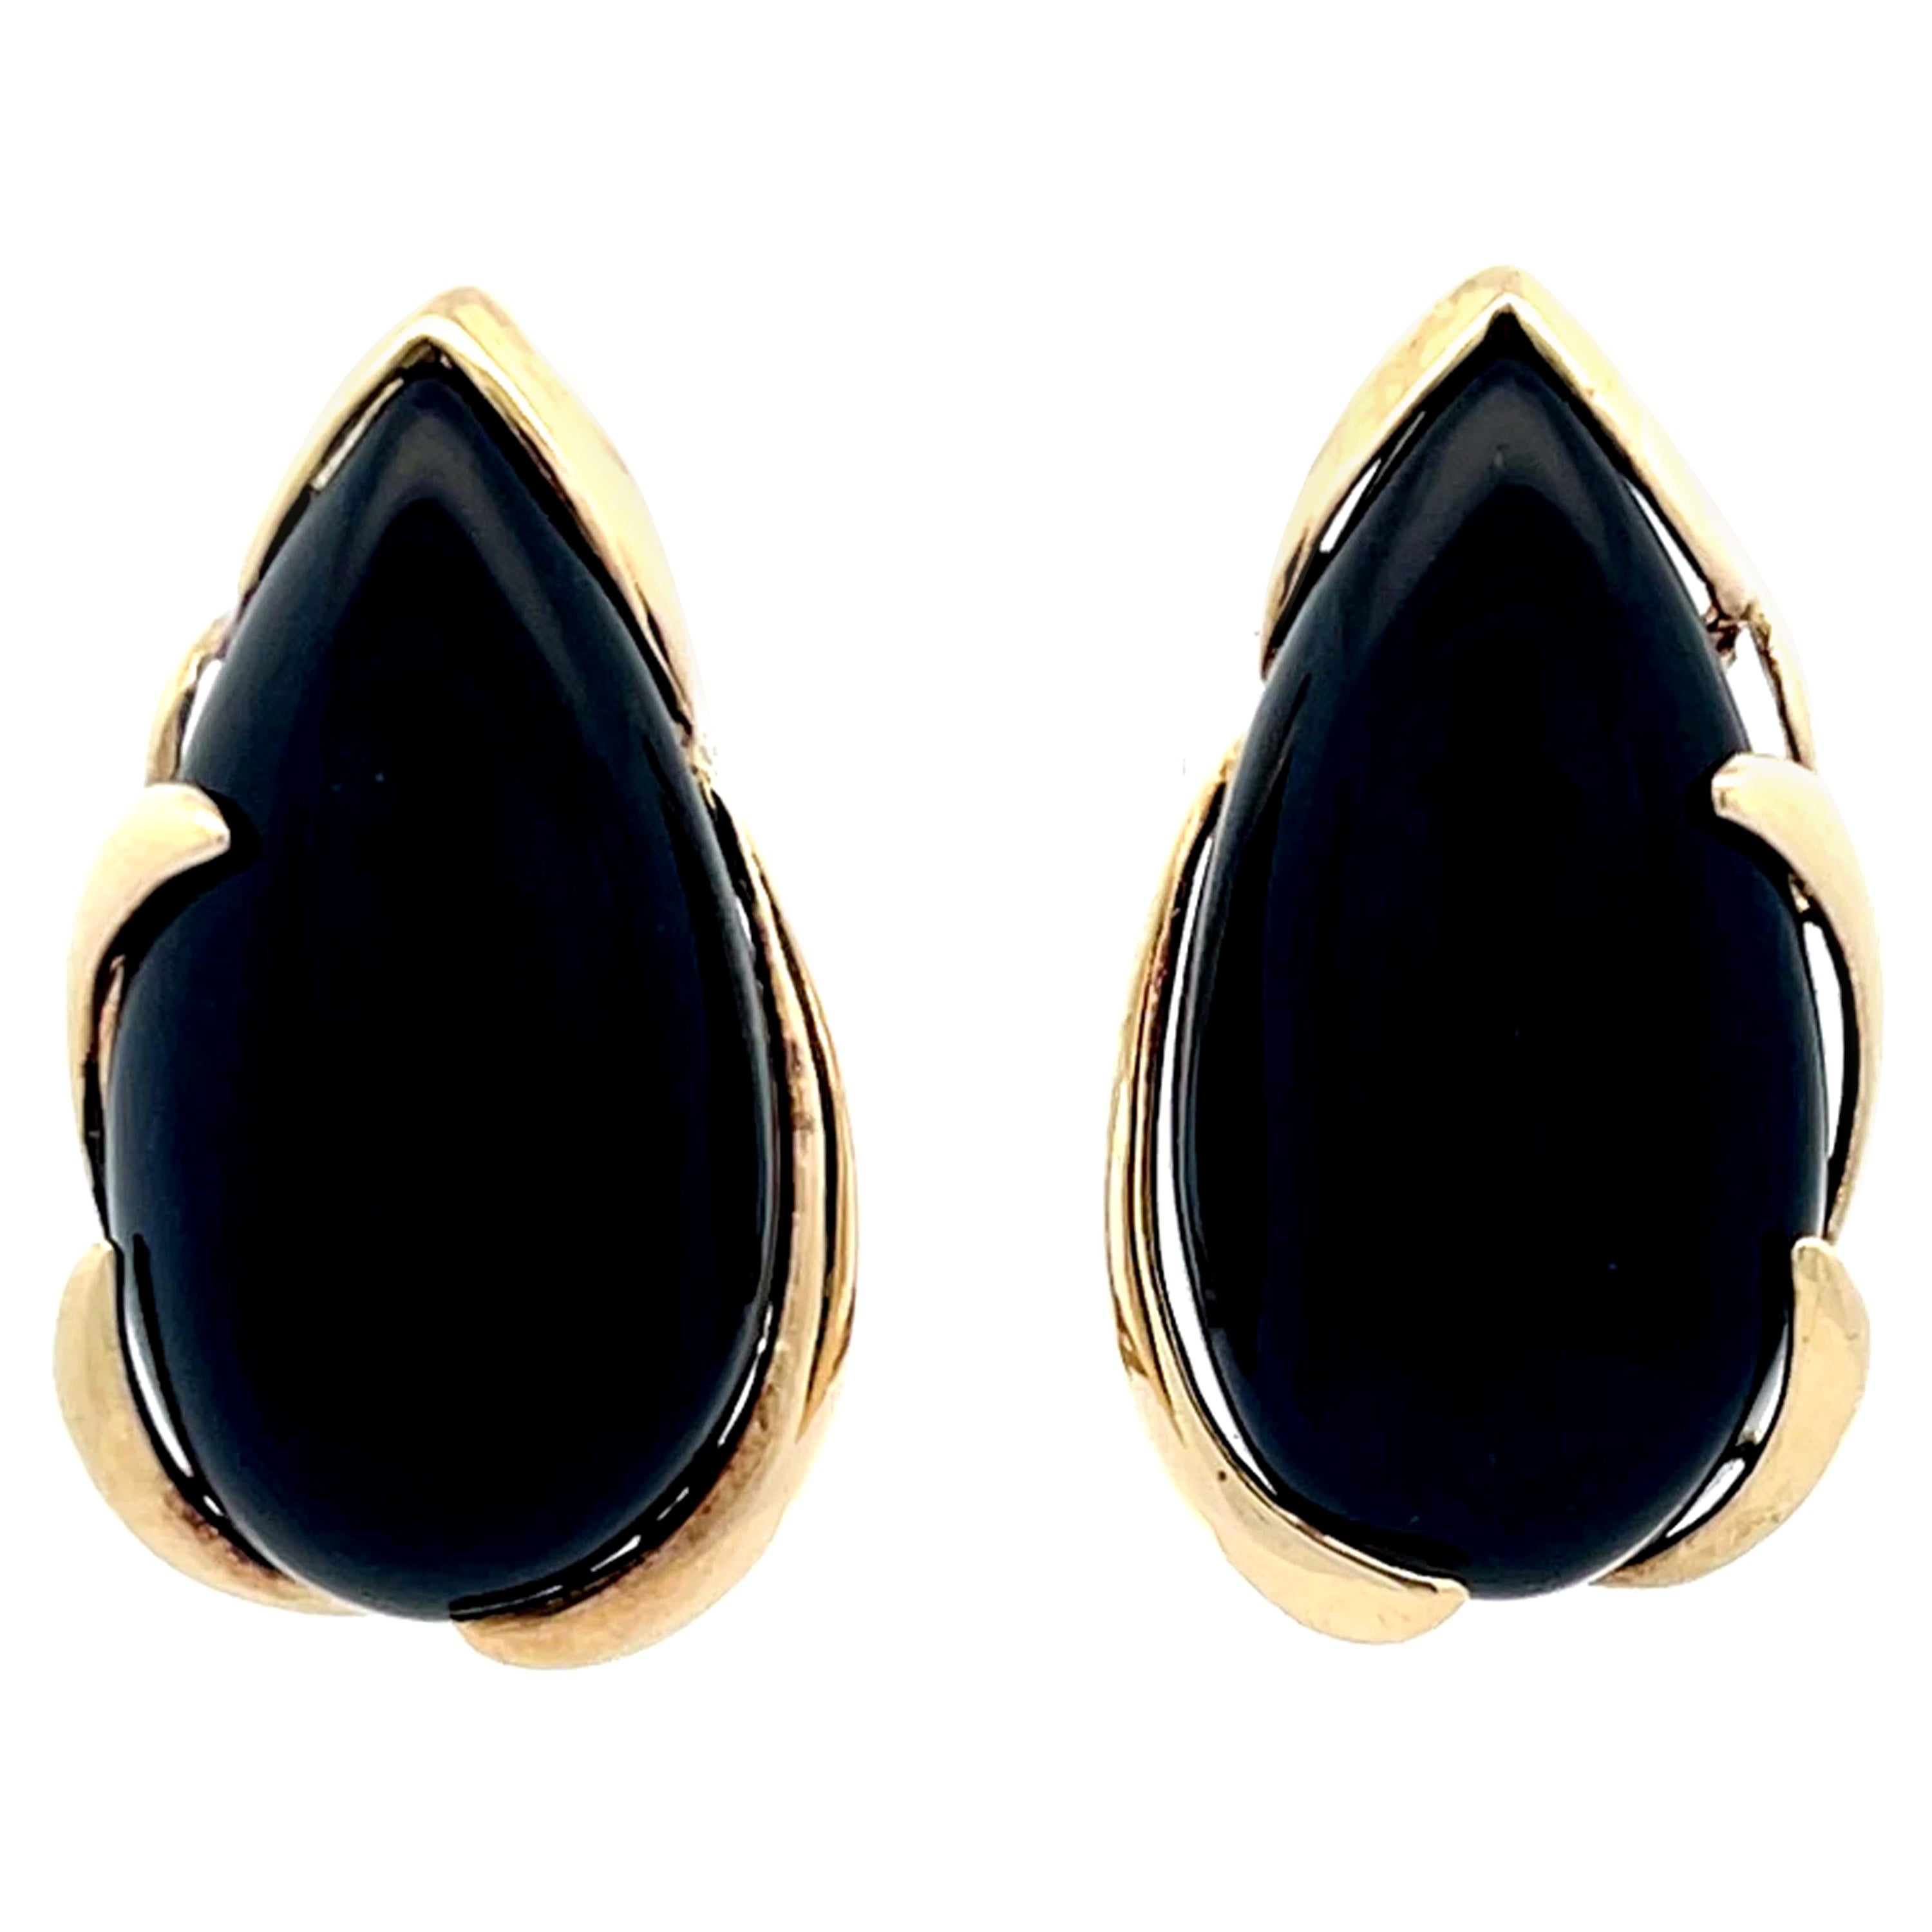 Pair of Black Onyx, Diamond, 14K Yellow Gold Earrings For Sale at 1stDibs